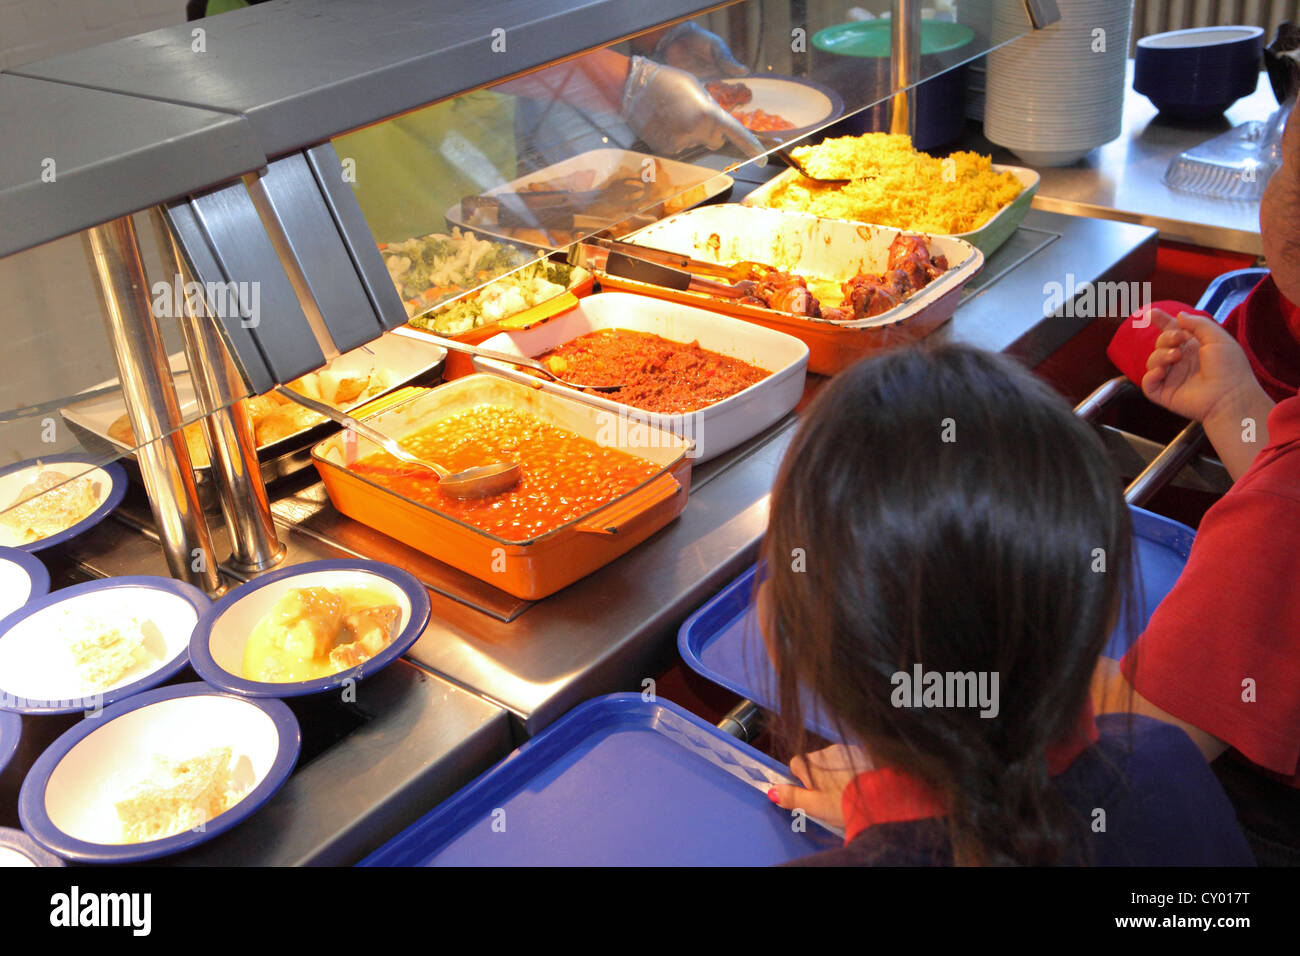 London Primary School, UK. Children queuing for hot lunch at refectory canteen. NB Cannot be recognized Stock Photo